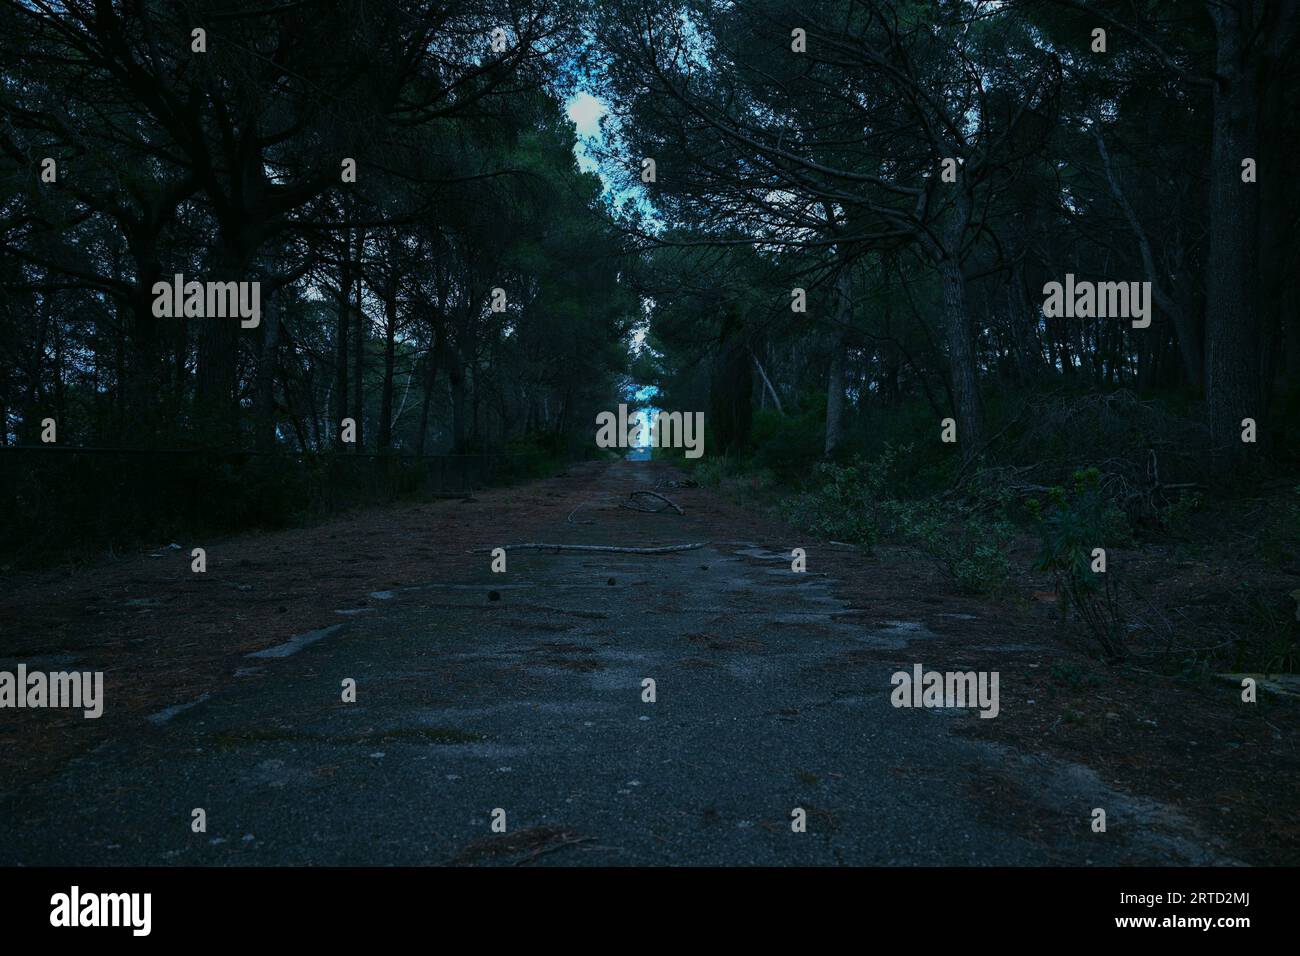 A street in a dimly lit area with dirt on the ground and trees lining the sides of the road Stock Photo